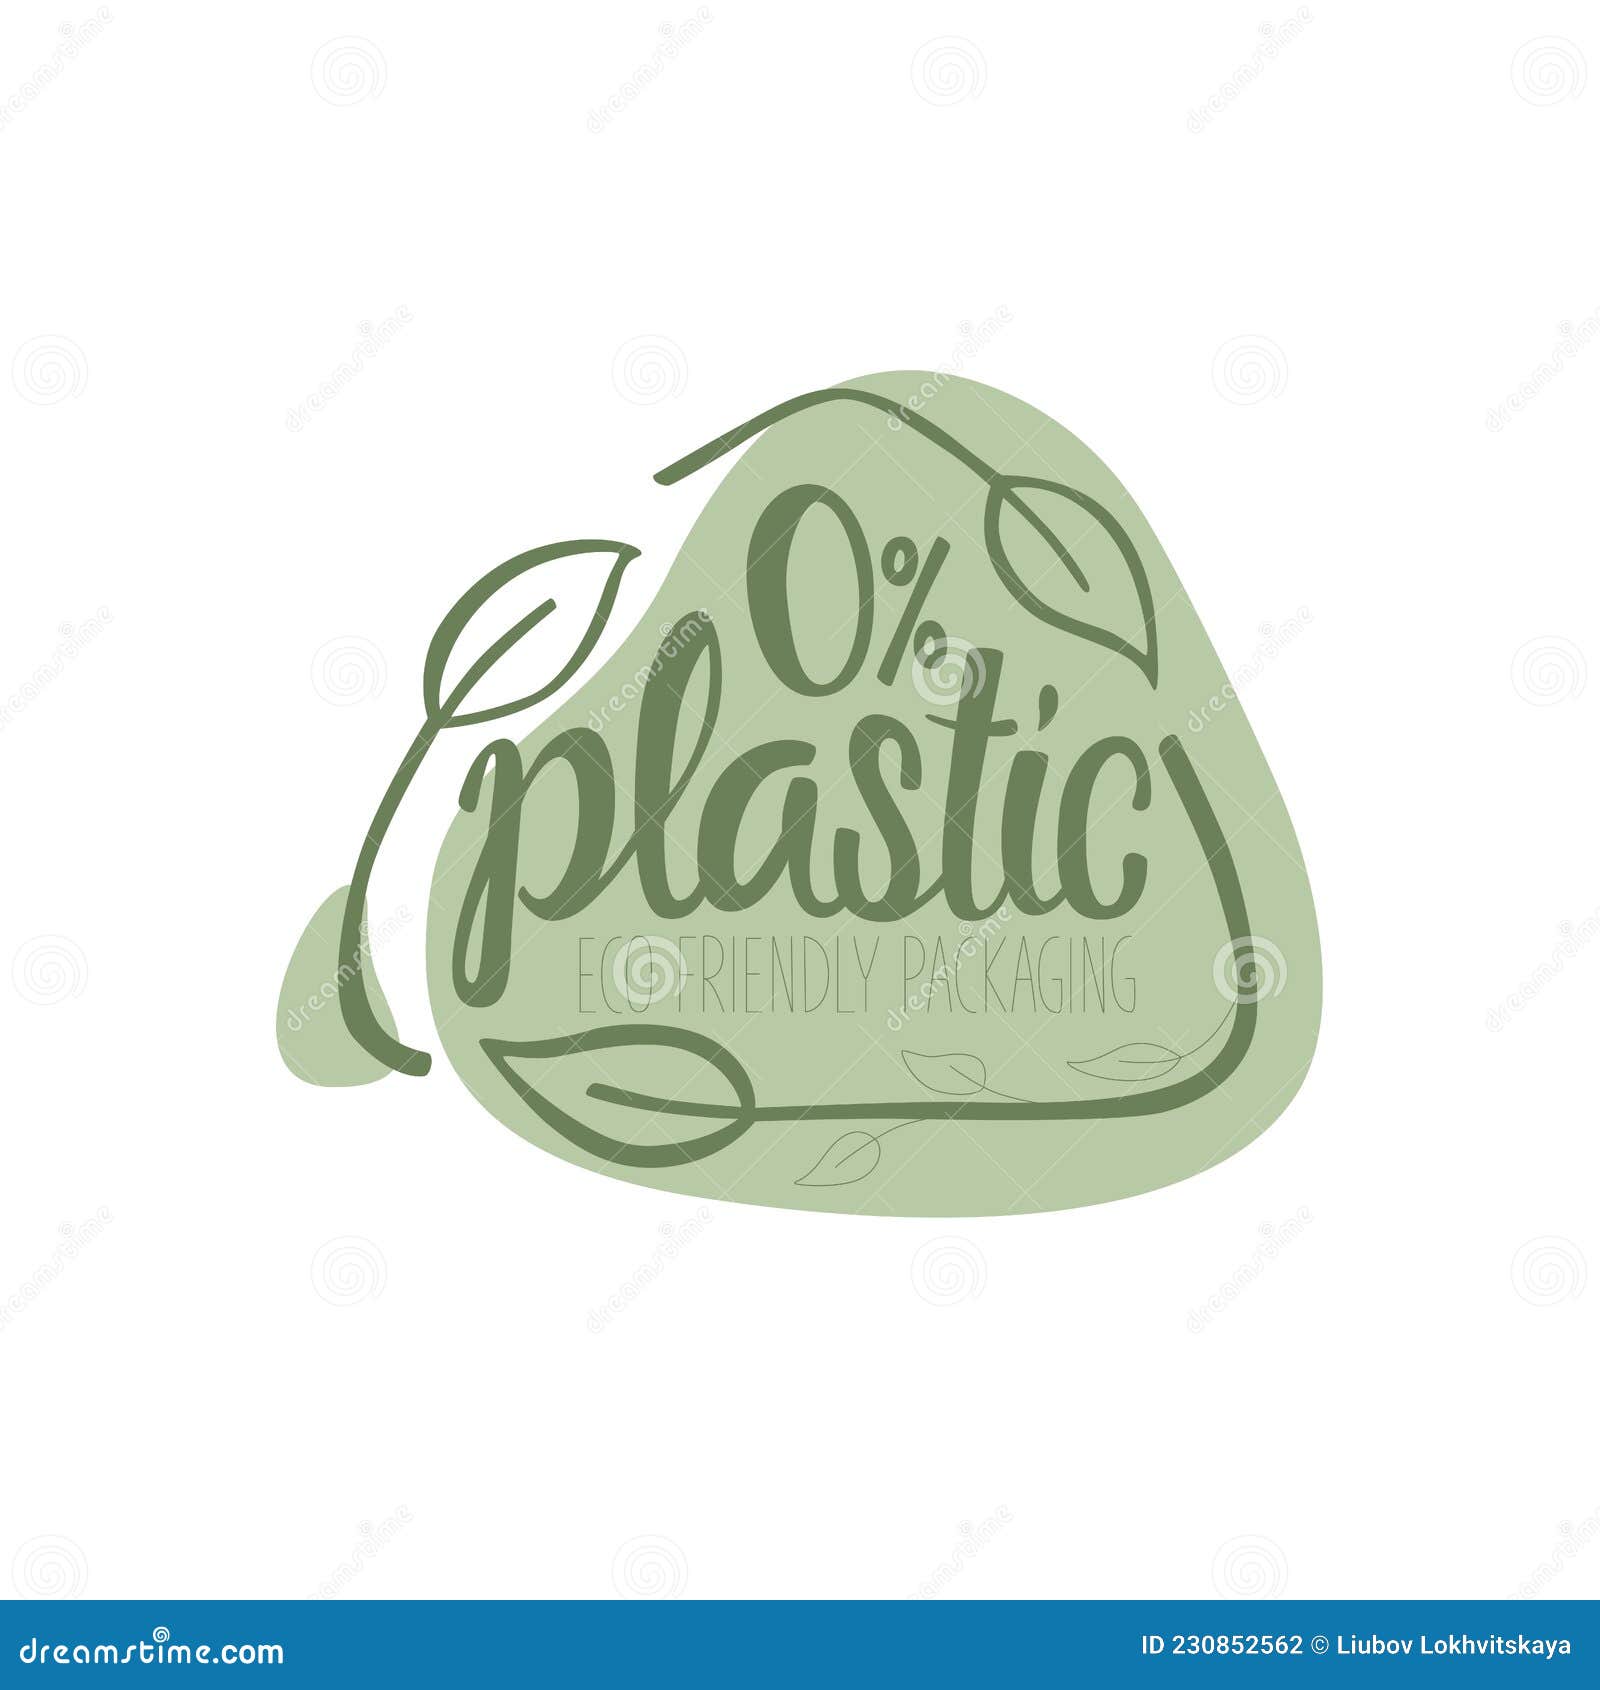 Plastic Free Handwritten Sign of Eco Friendly, Natural and Organic Labels for Print Packaging Biodegradable, Stock Vector - Illustration of packaging, symbol: